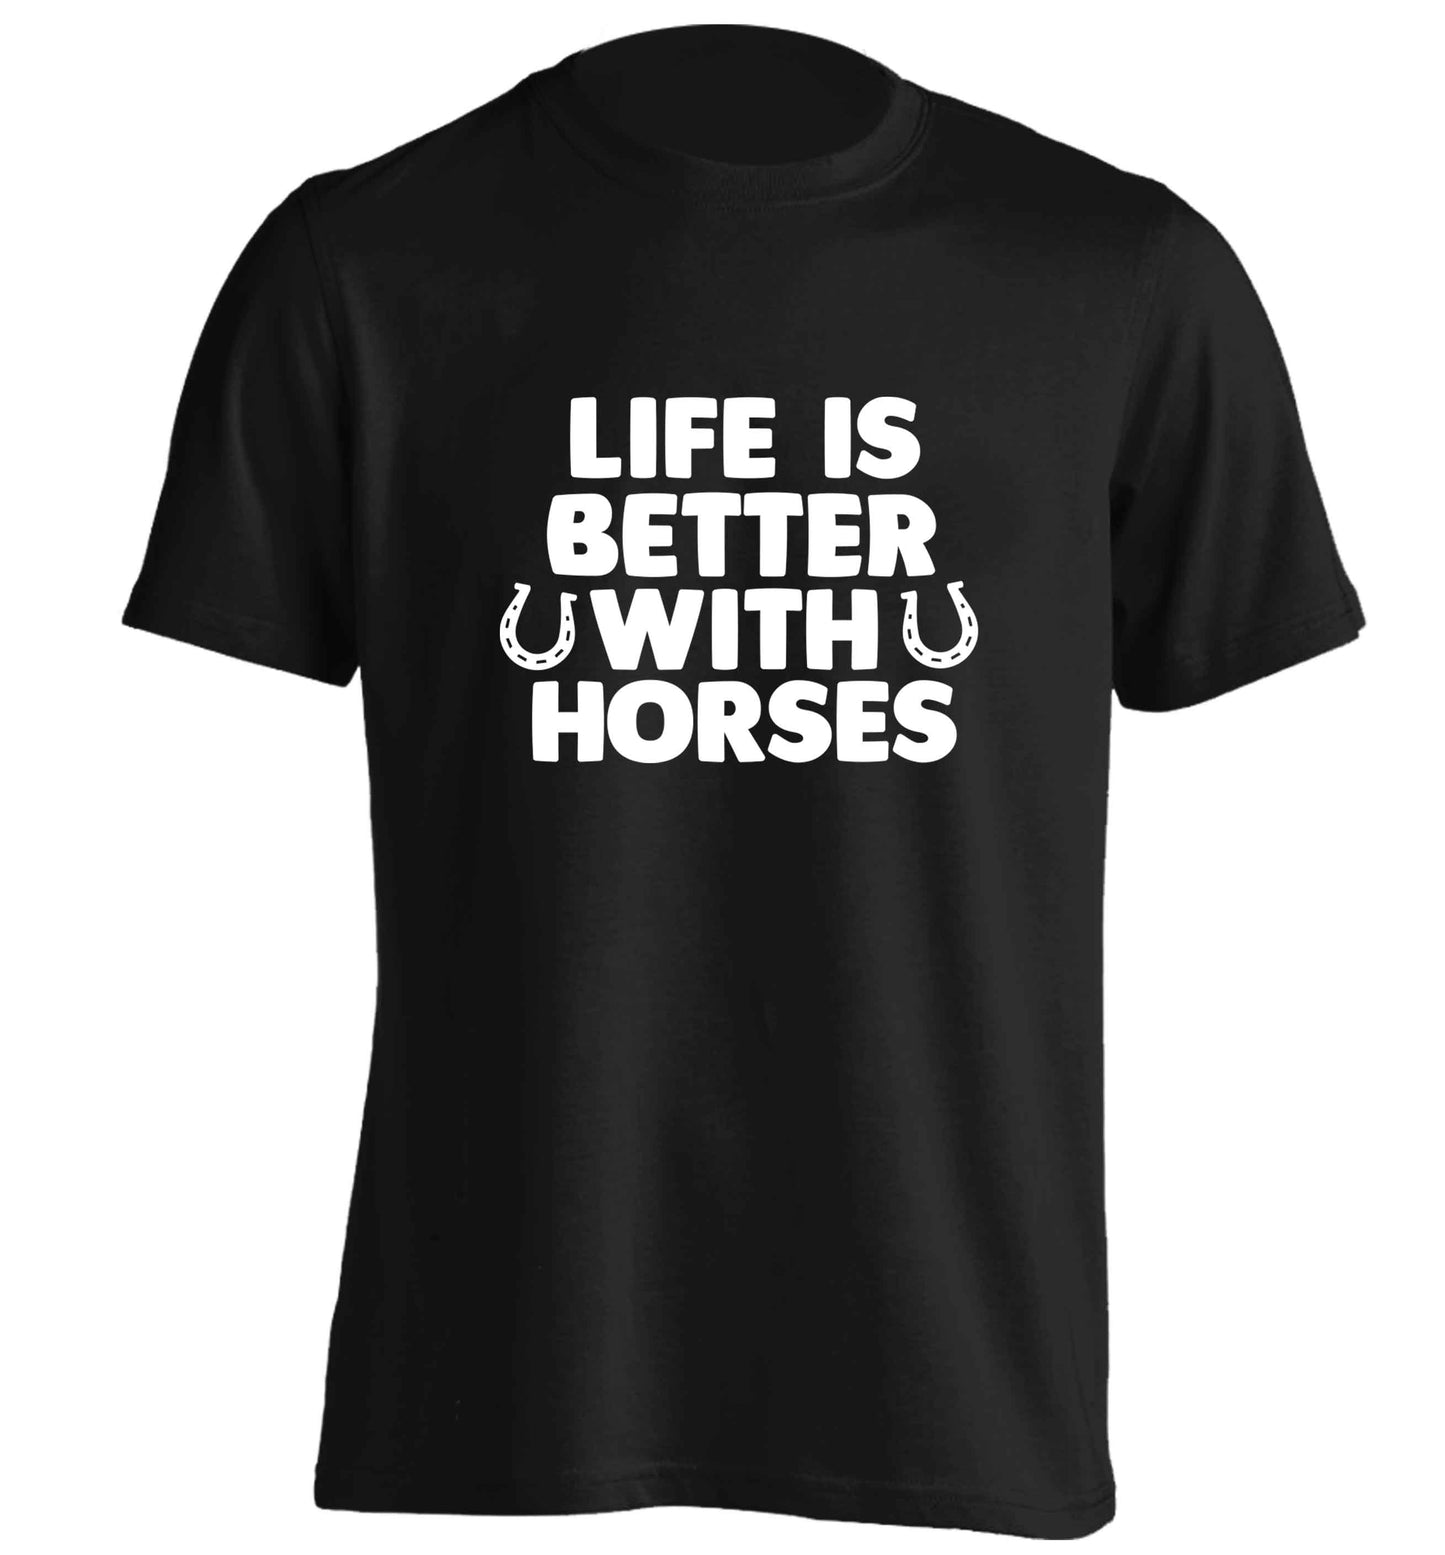 Life is better with horses adults unisex black Tshirt 2XL